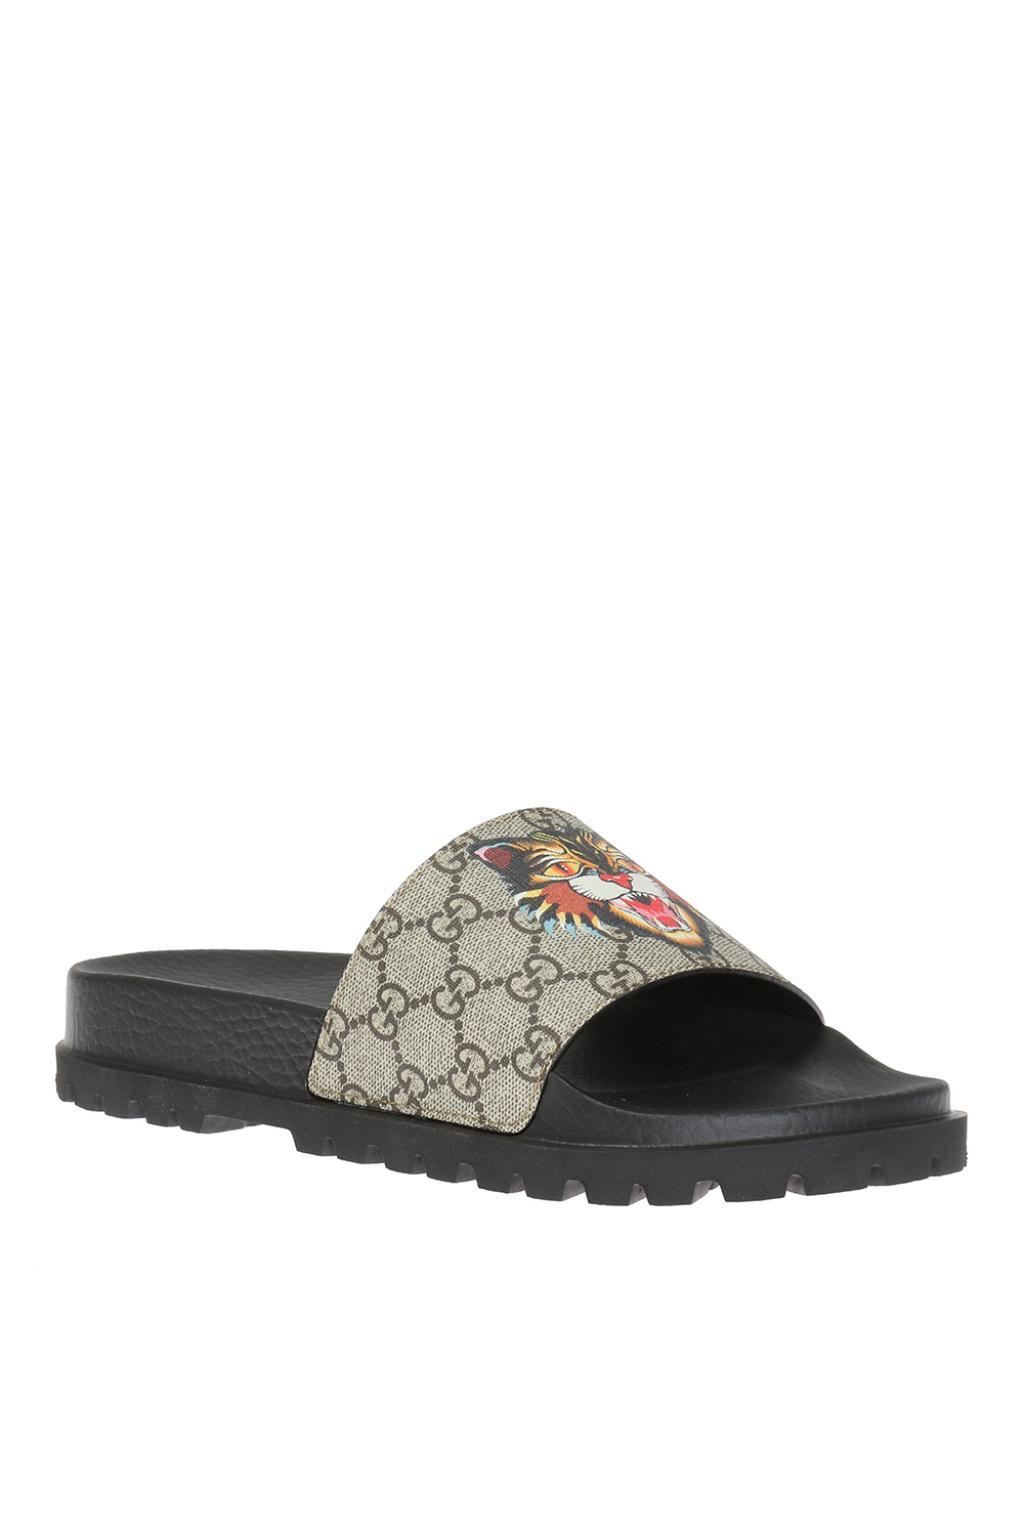 gucci slides with lion, OFF 71%,www 